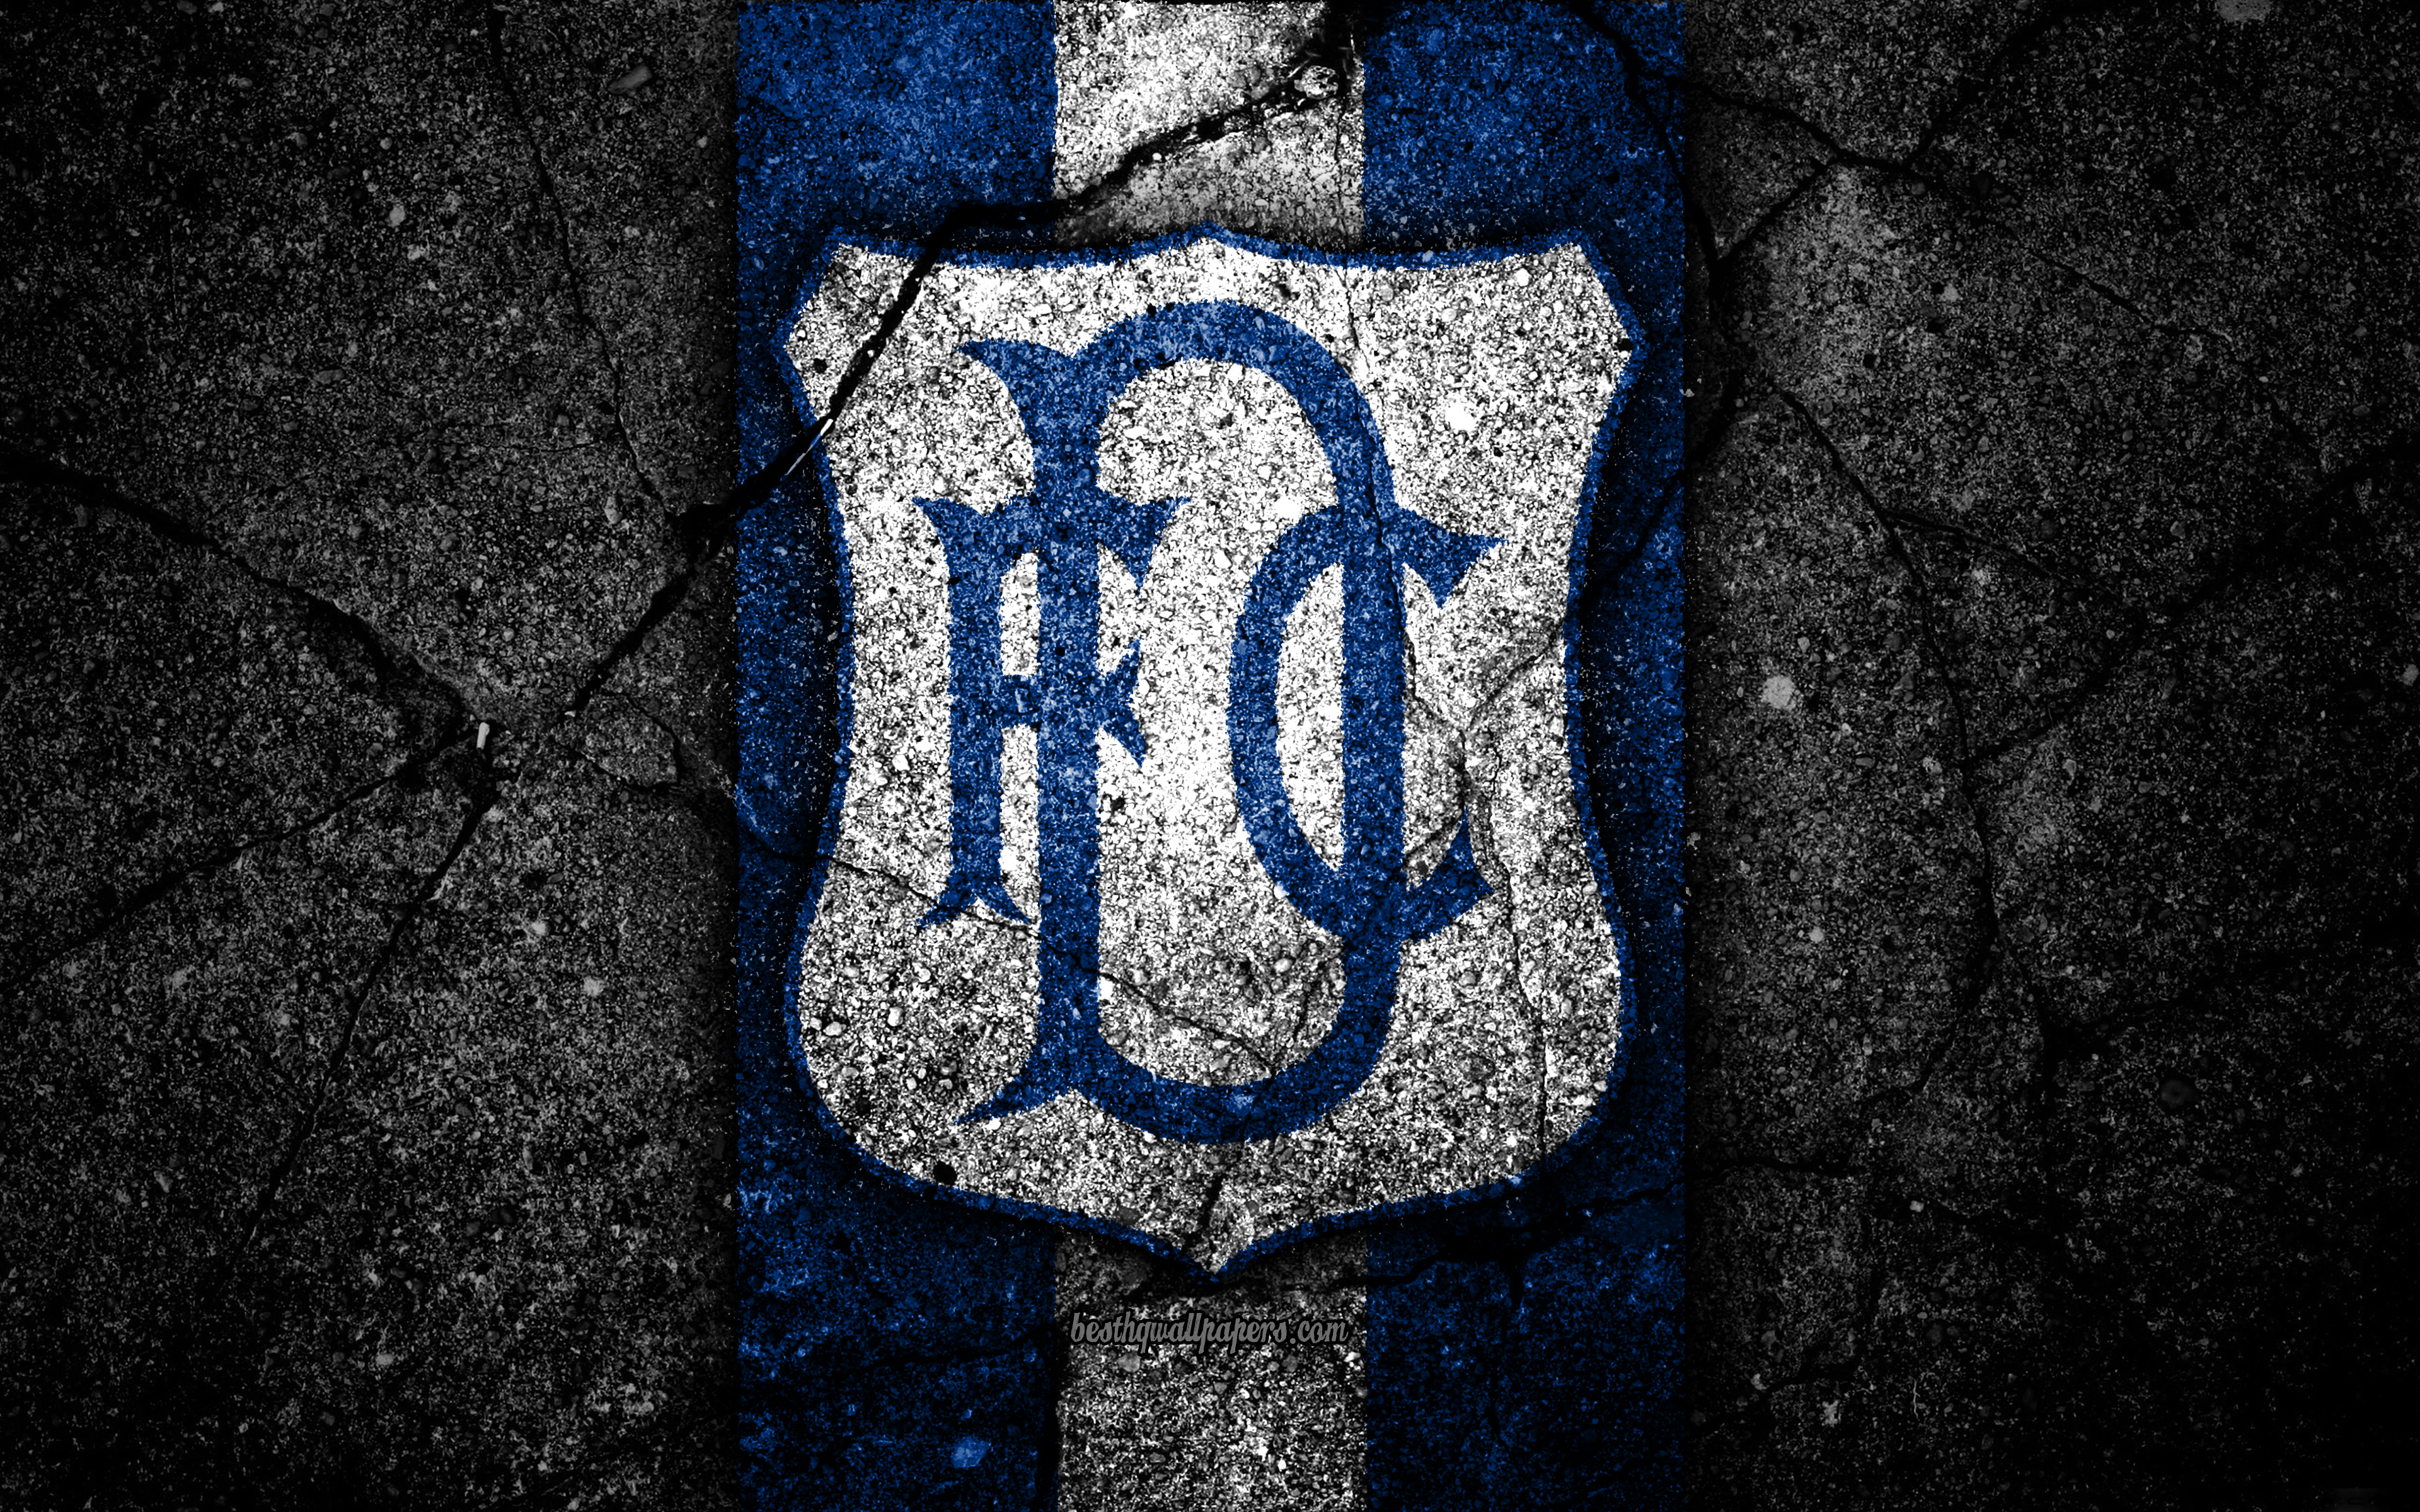 Dundee F.C. Wallpapers